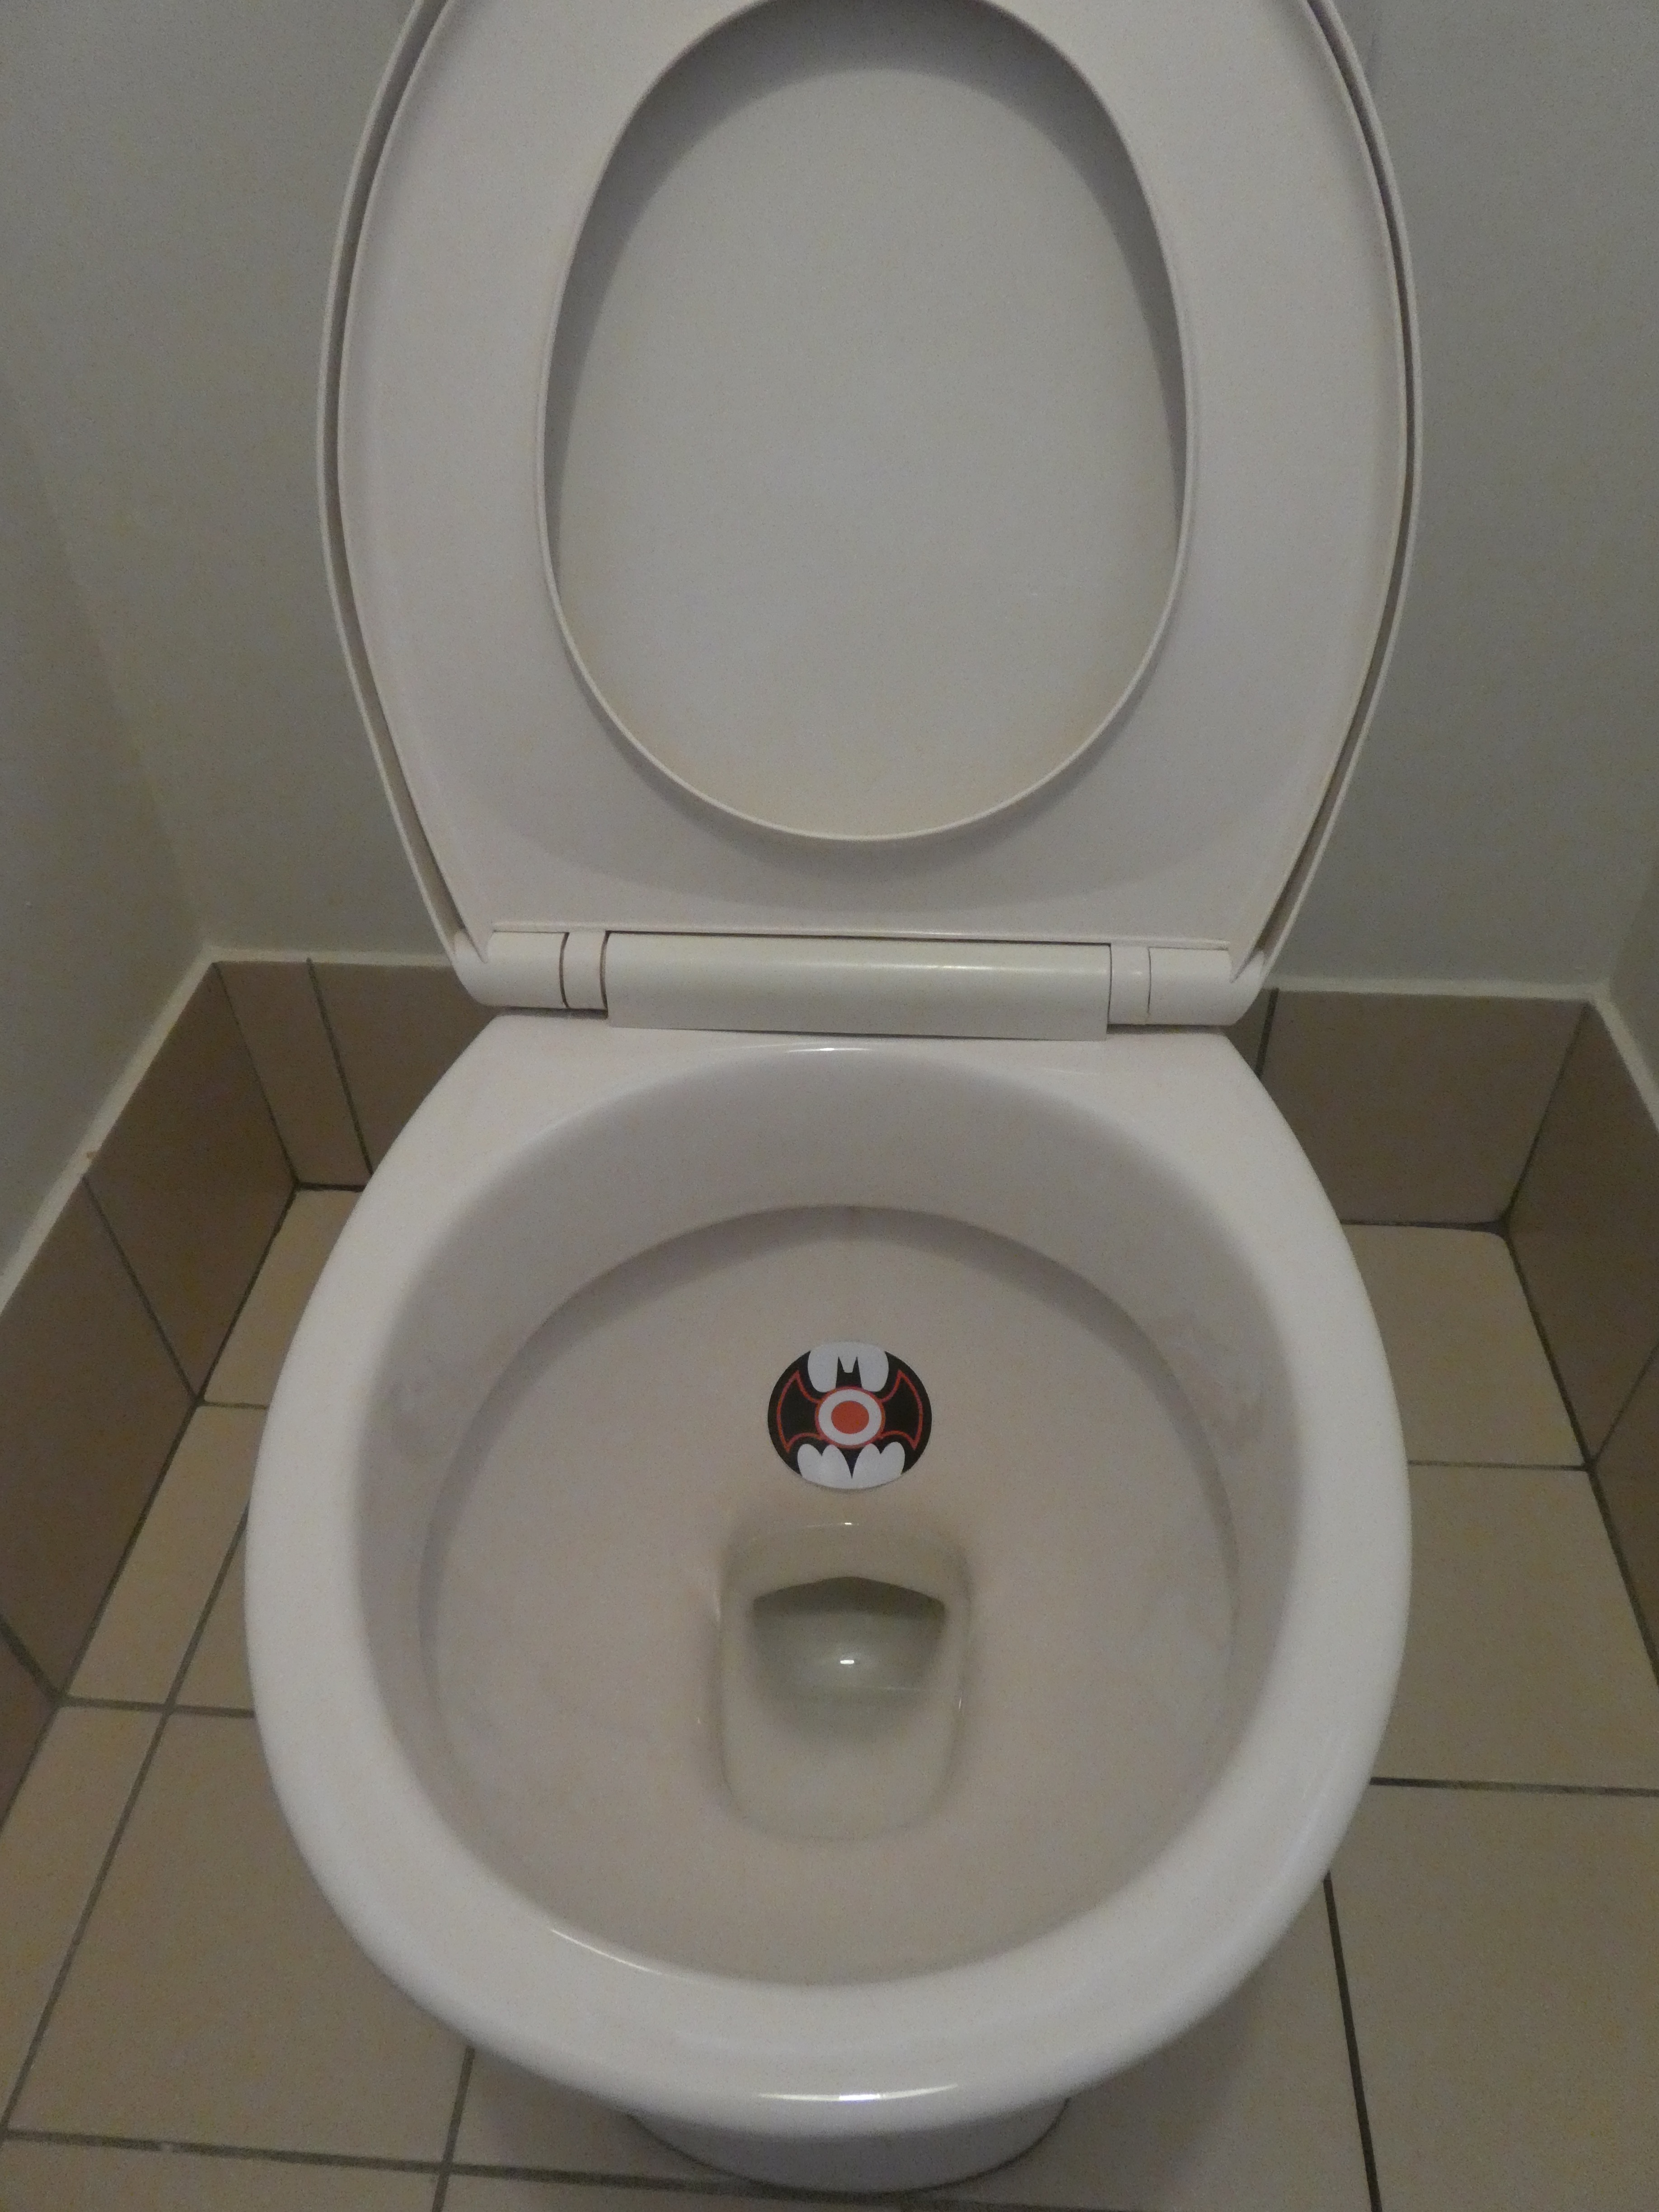 Toilet Target for Boys Urination